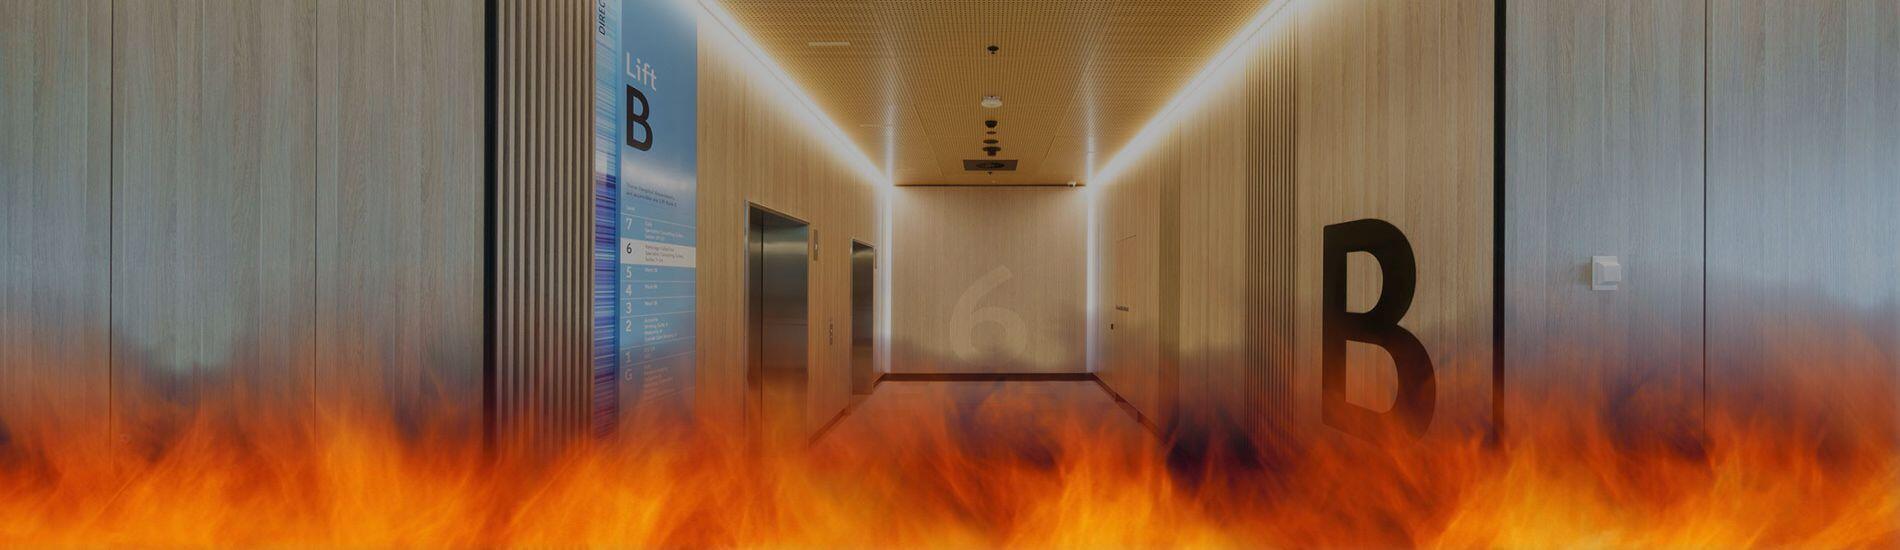 Supawood products meet NCC/BAC fire safety requirements